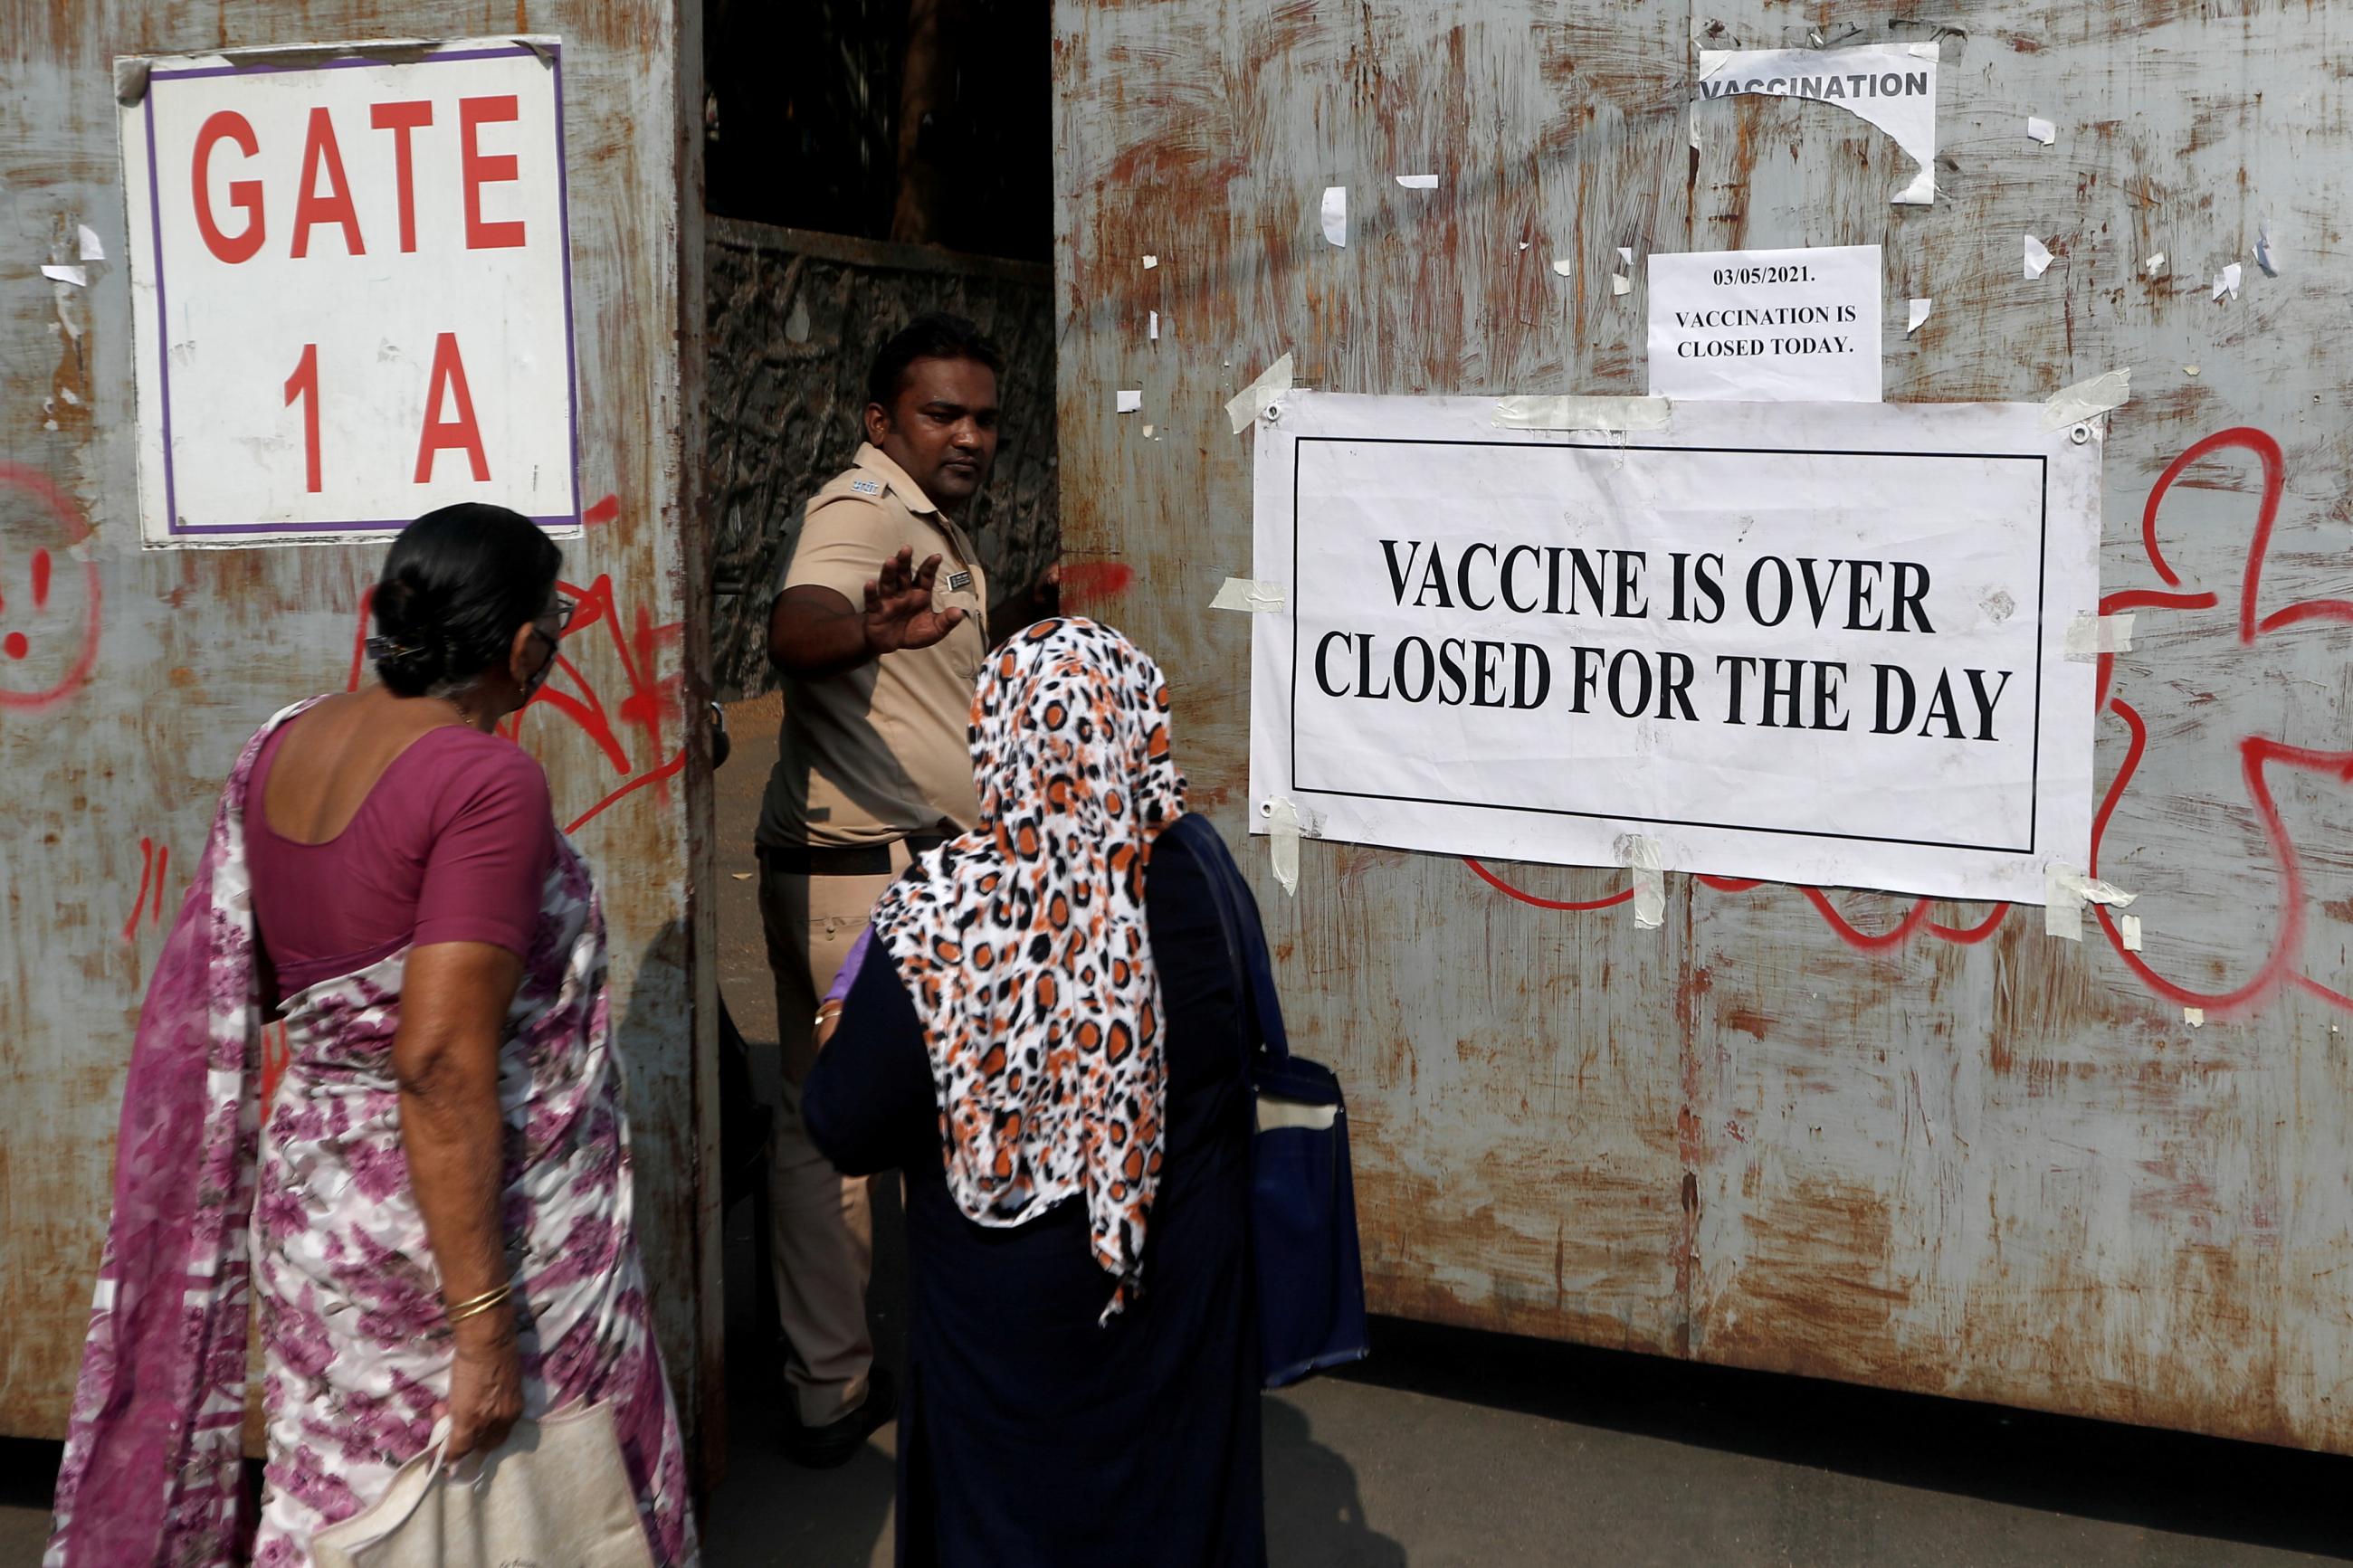 A policeman asks people who came to receive a dose of a coronavirus disease (COVID-19) vaccine to leave as they stand outside the gate of a vaccination centre which was closed due to unavailability of the supply of COVID-19 vaccine, in Mumbai, India, May 3, 2021.